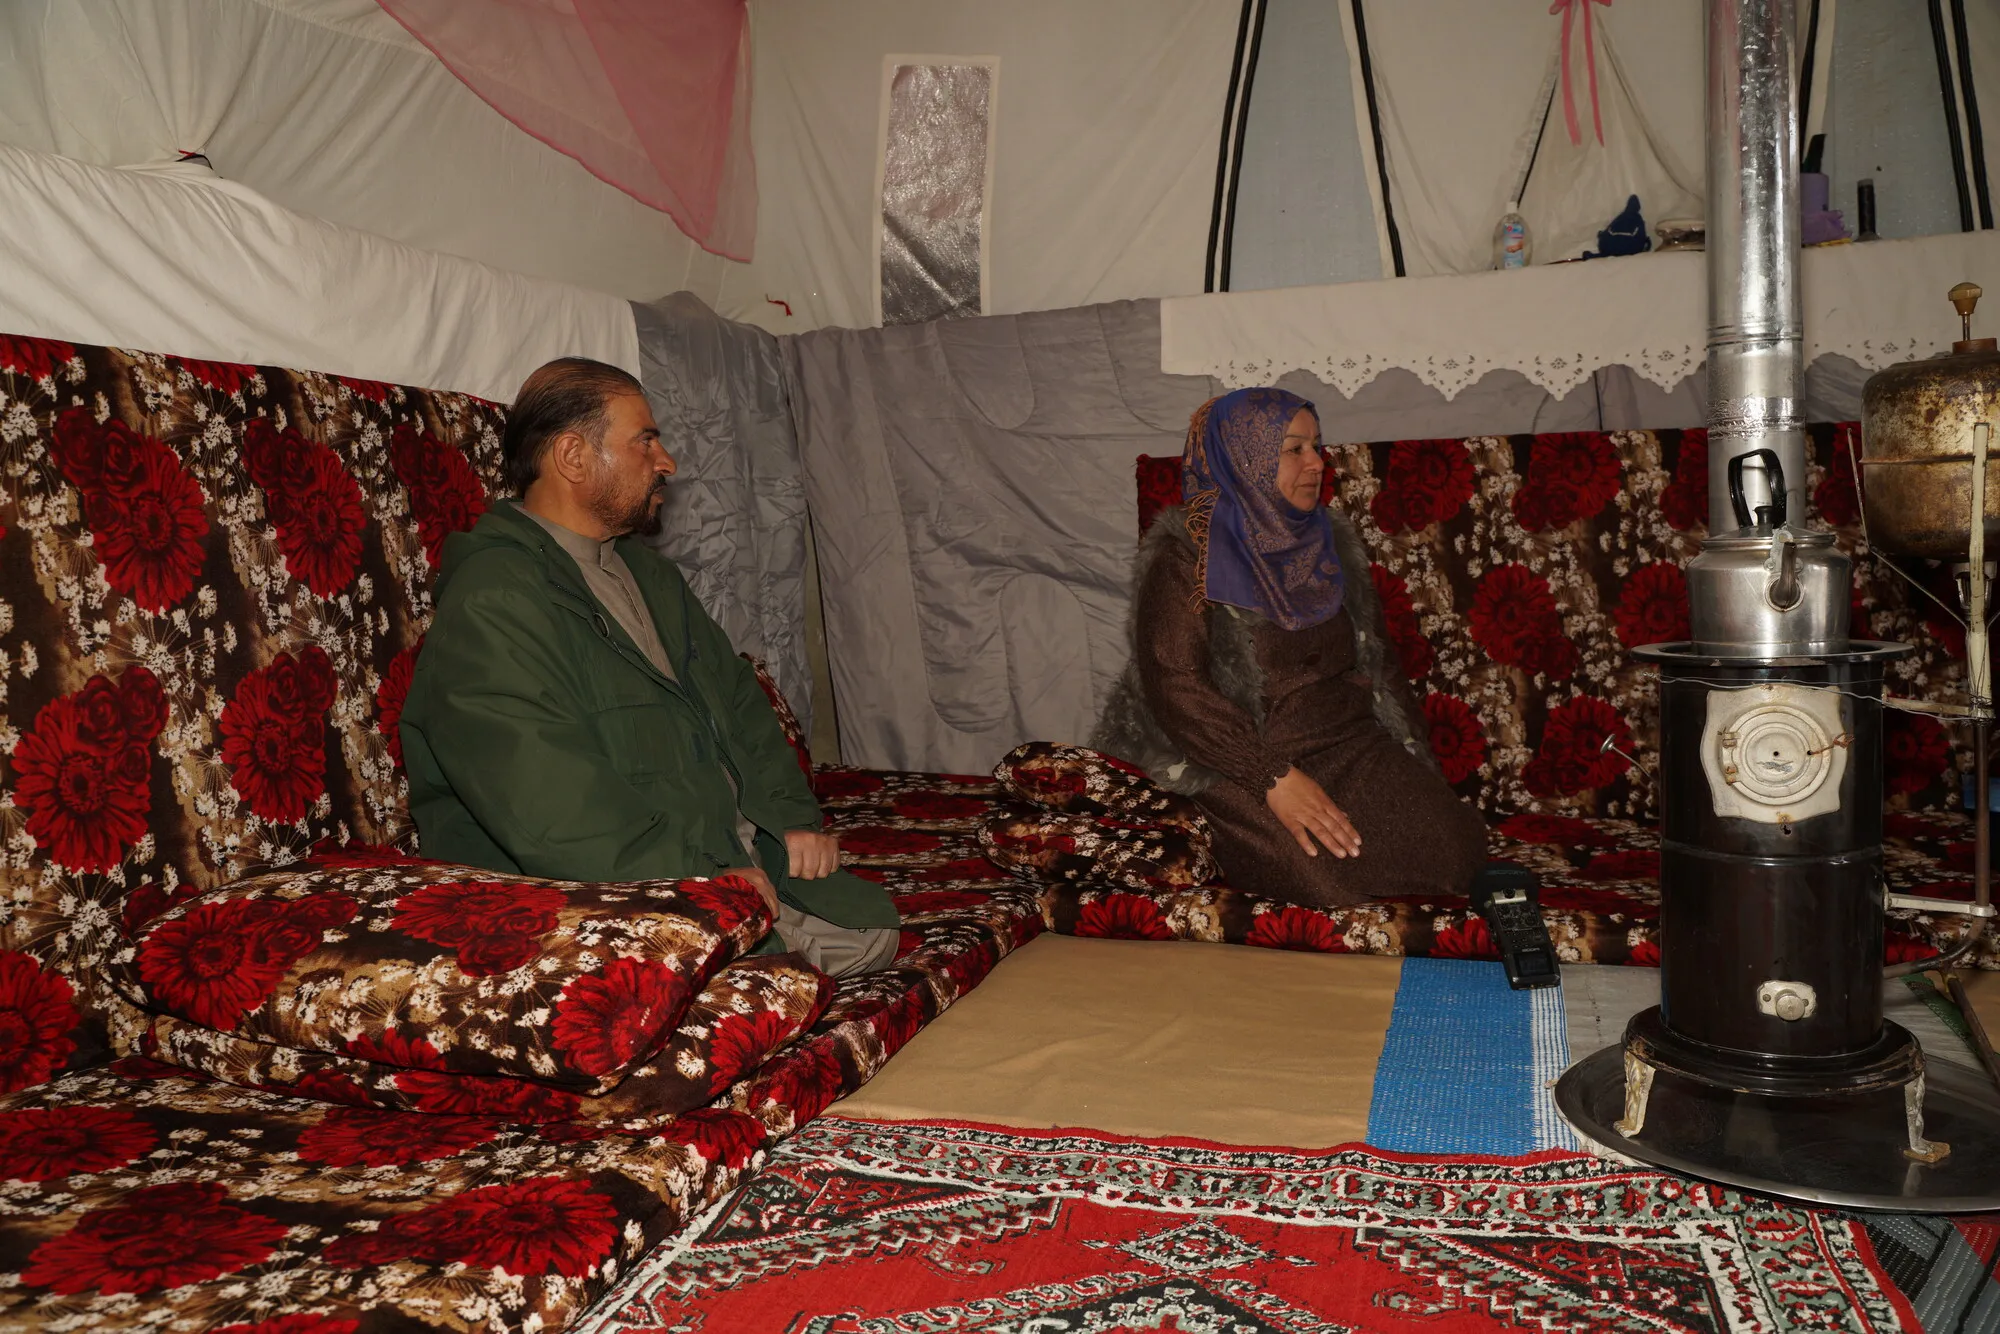 An internally displaced woman and her husband sitting inside their tent.